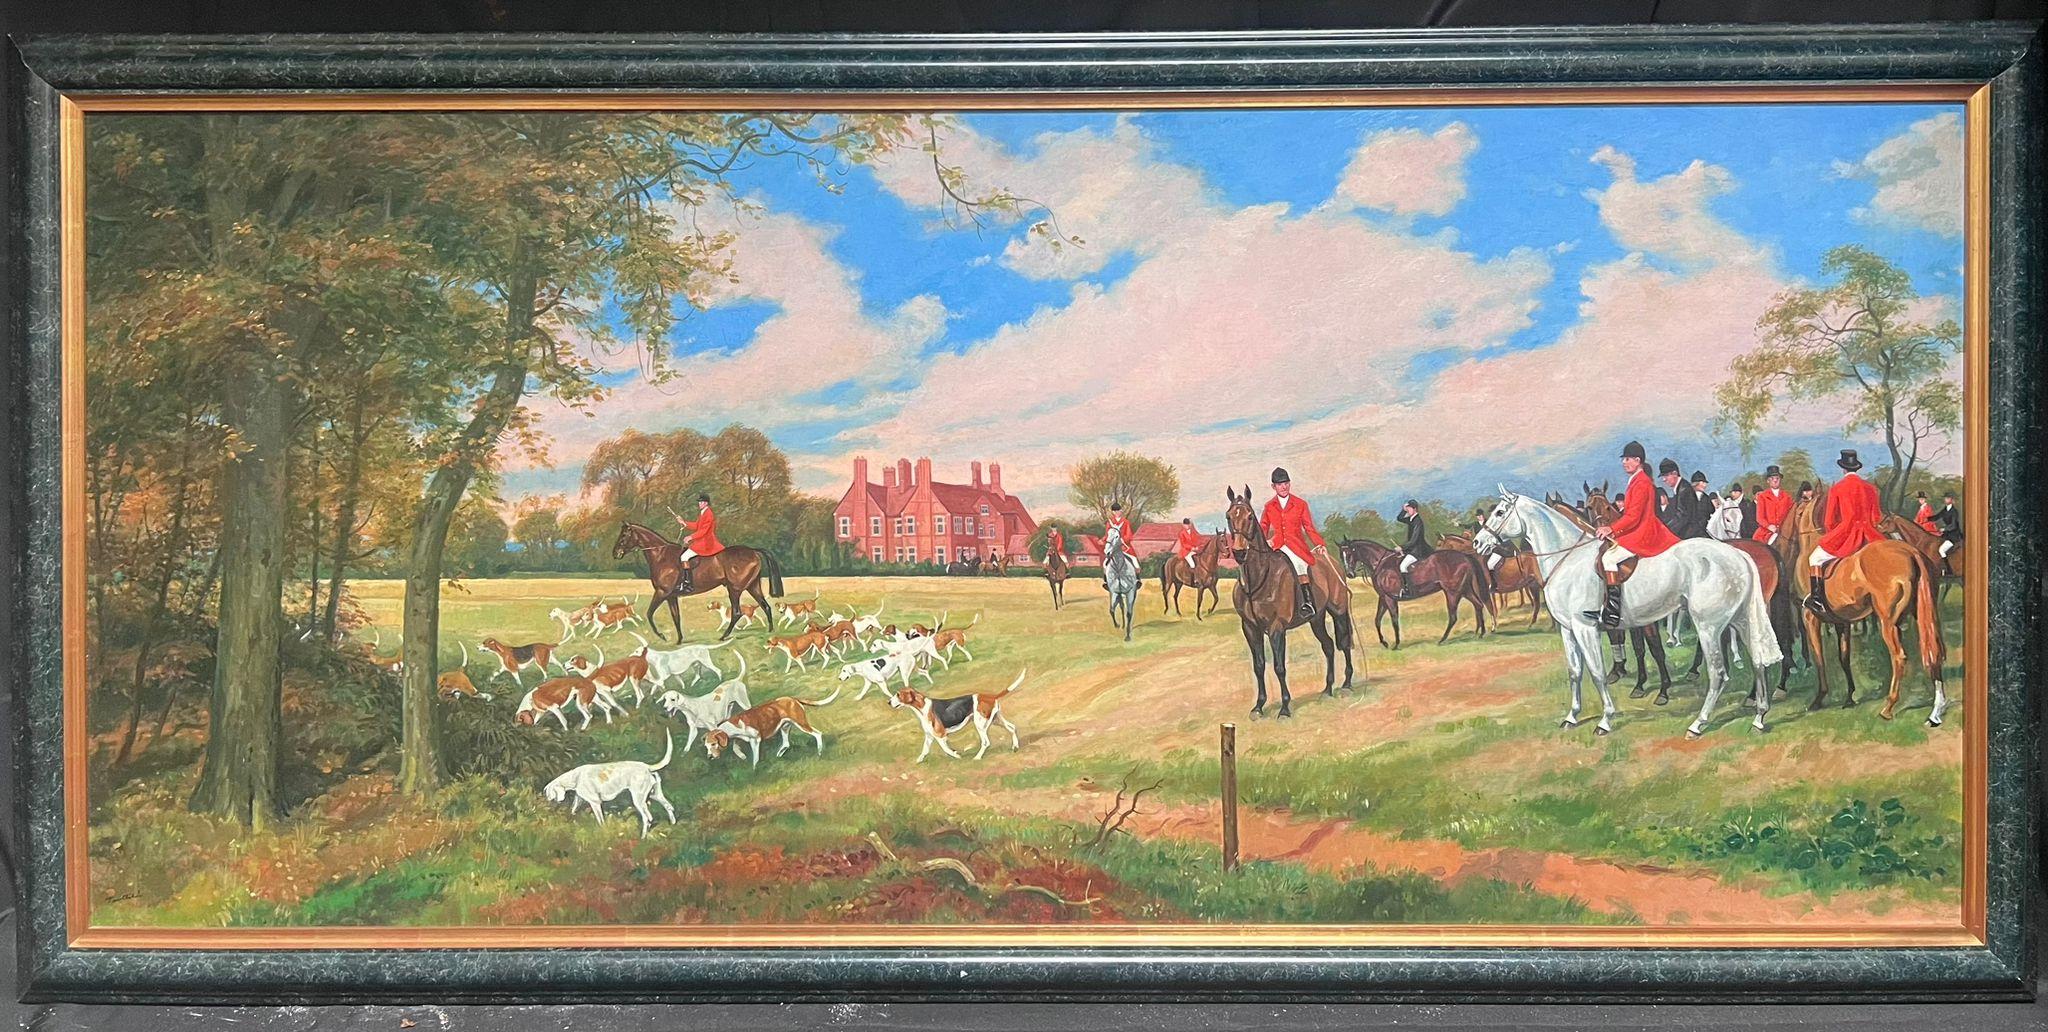 The Meet at Rearsby Grange
British School, indistinctly signed 
titled and inscribed verso
oil on board, framed
framed: 28 x 58 inches
board: 24 x 54 inches
provenance: private collection, England
condition: very good and sound condition